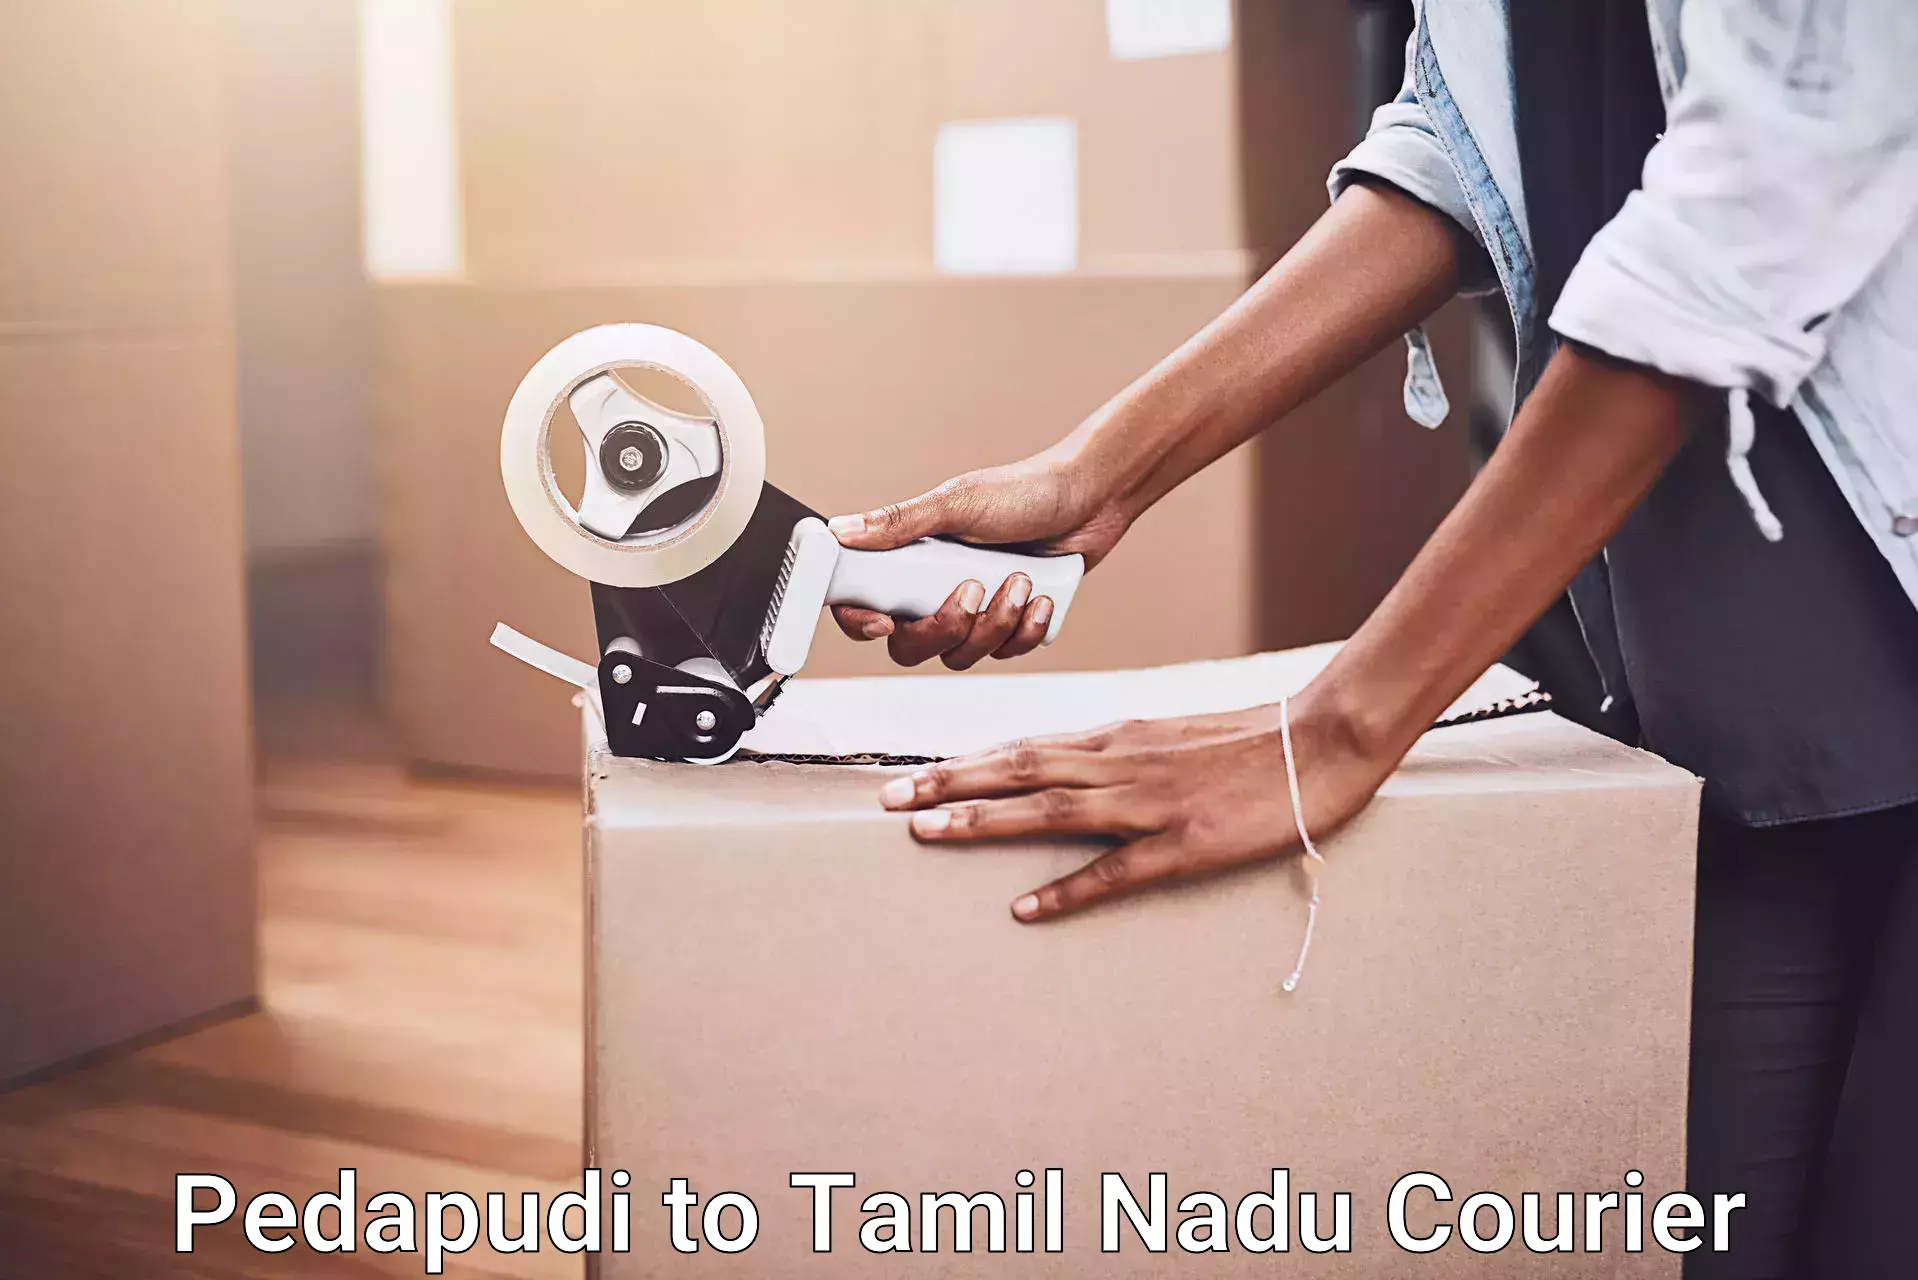 Customized relocation services Pedapudi to Tamil Nadu